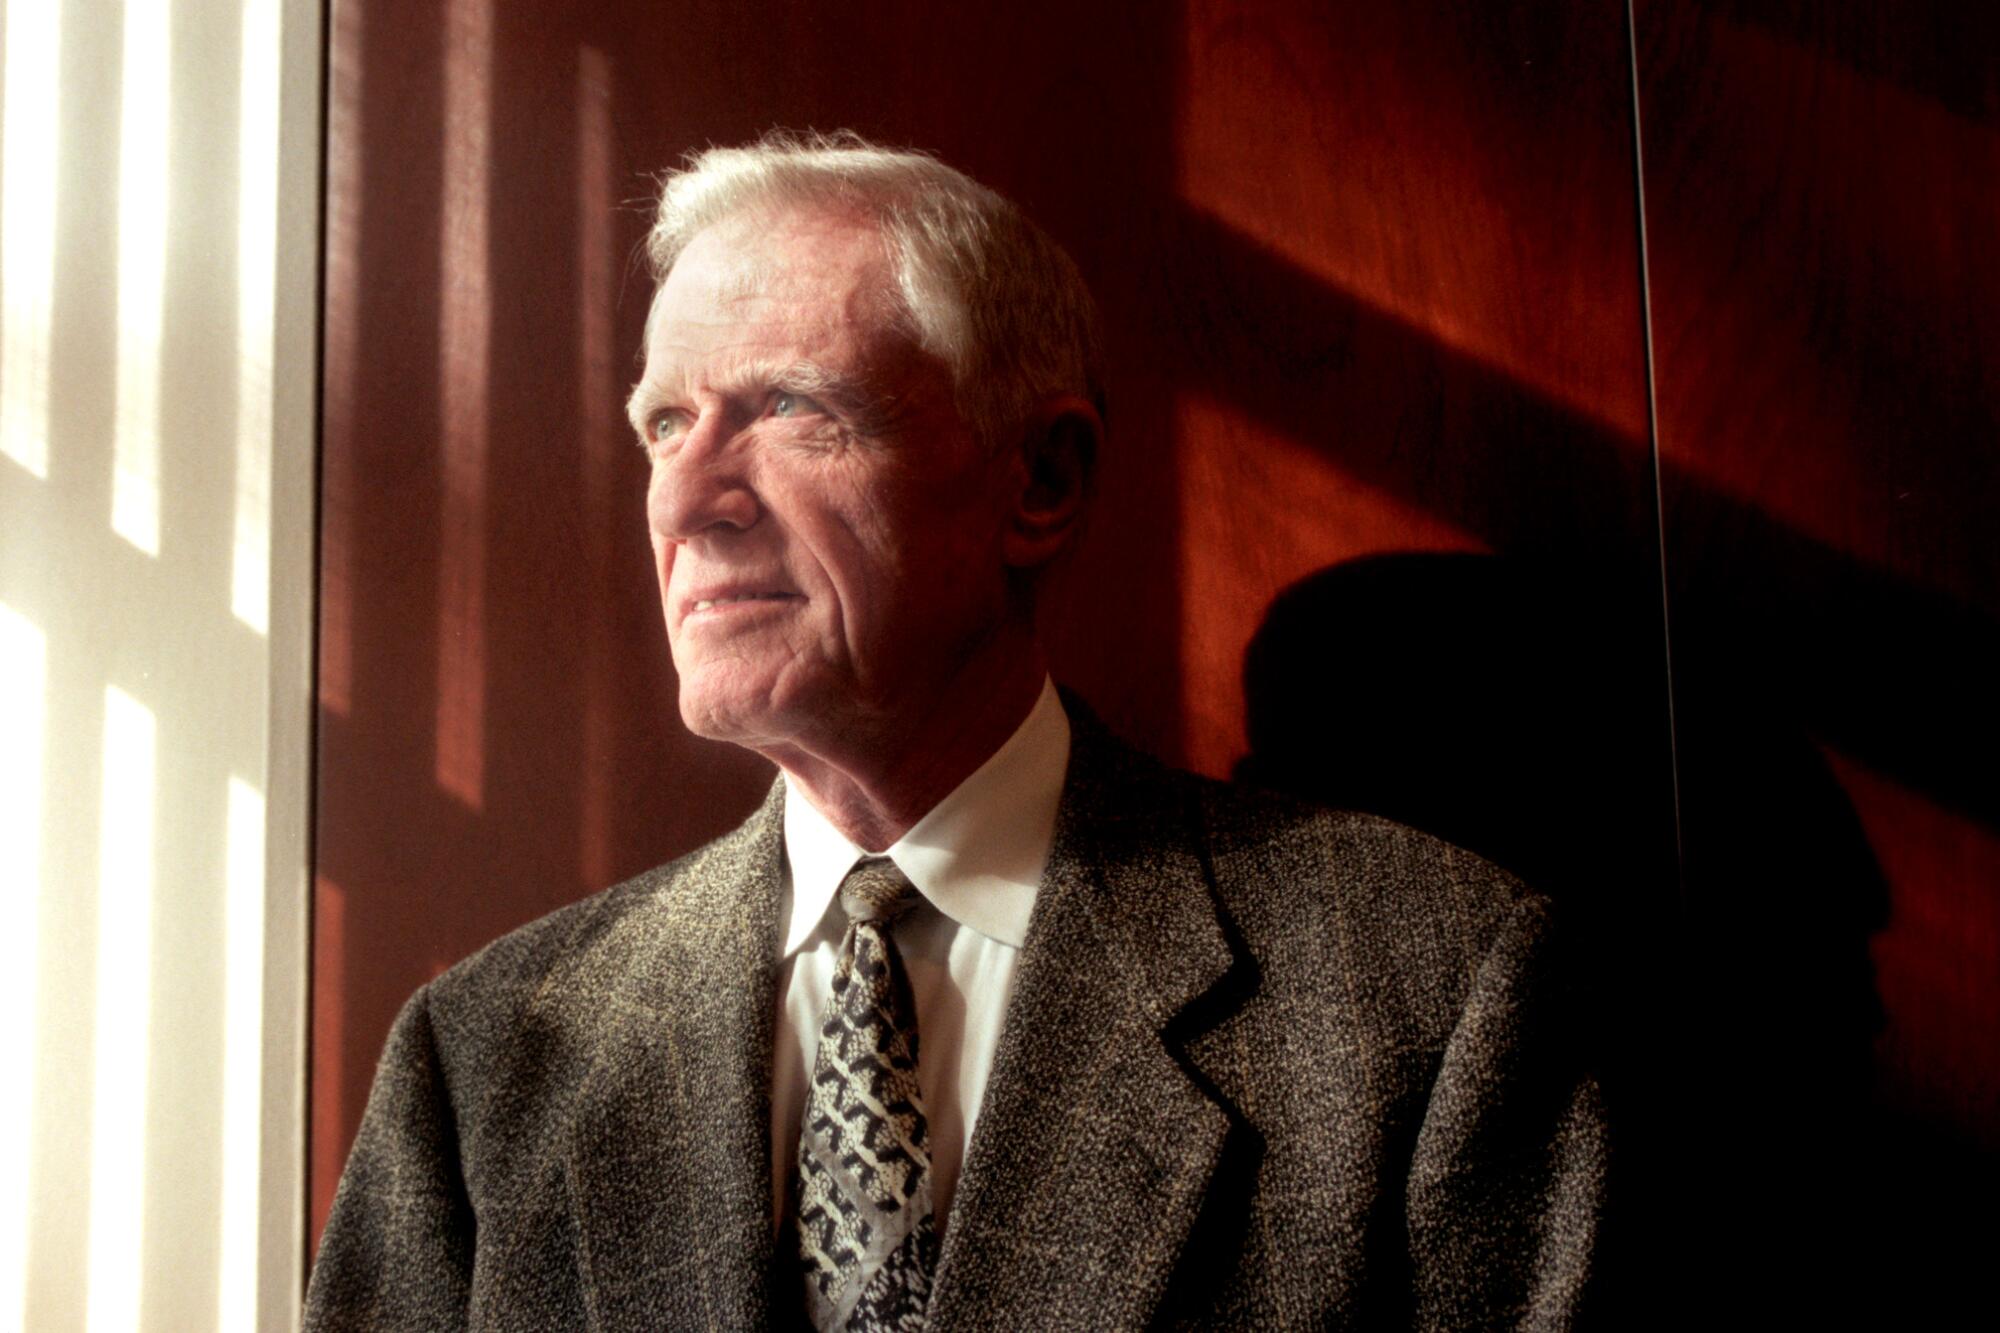 Charles E. Young after he announced he would step down as chancellor of UCLA in 1997.